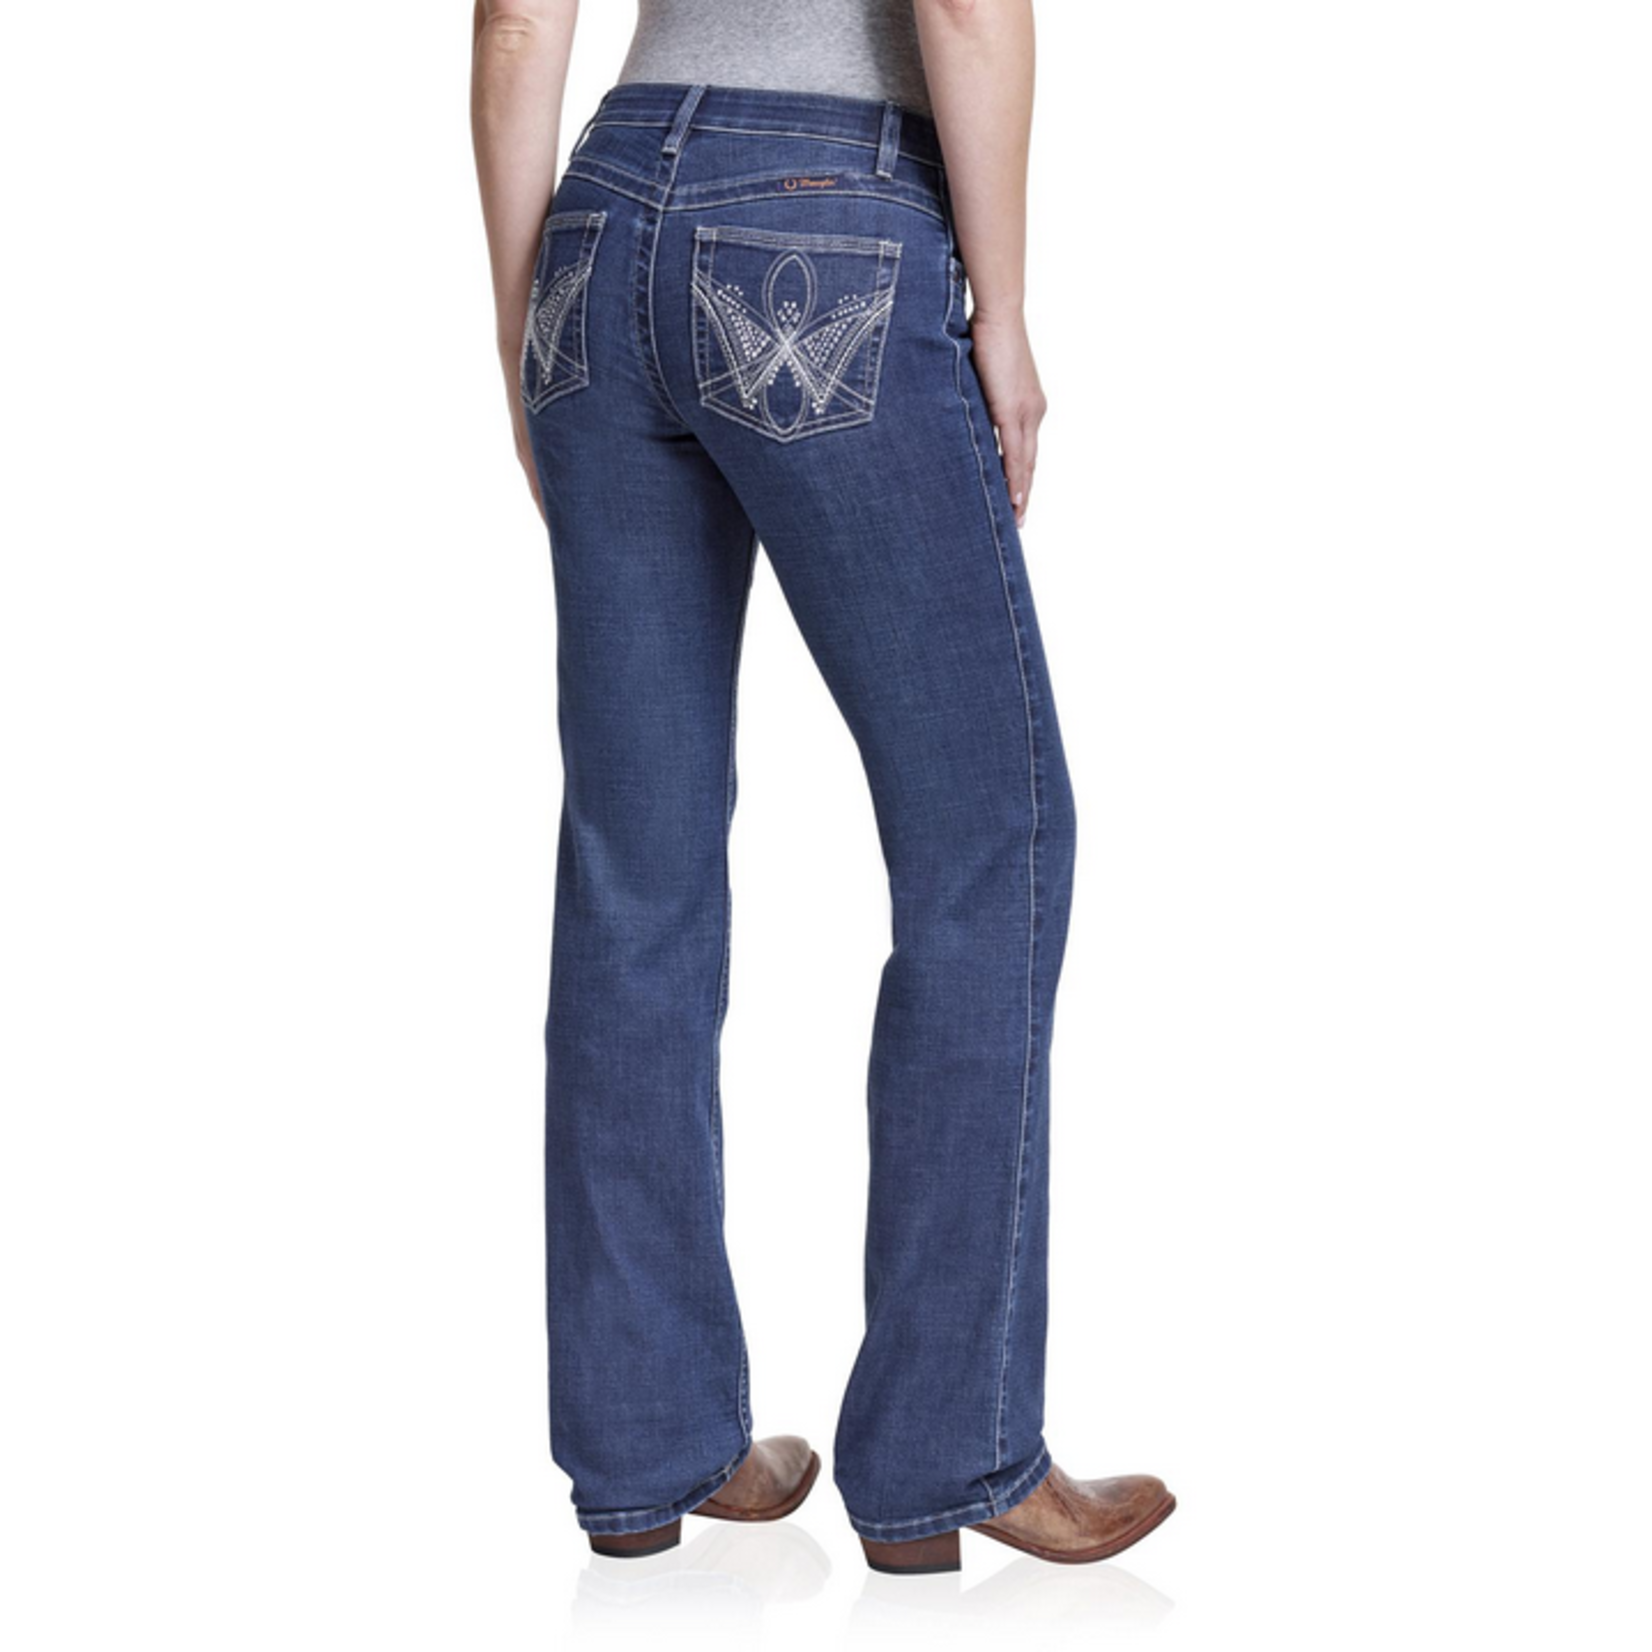 Wrangler Wrangler - The Ultimate Riding Jean Q-Baby - WRQ20WI